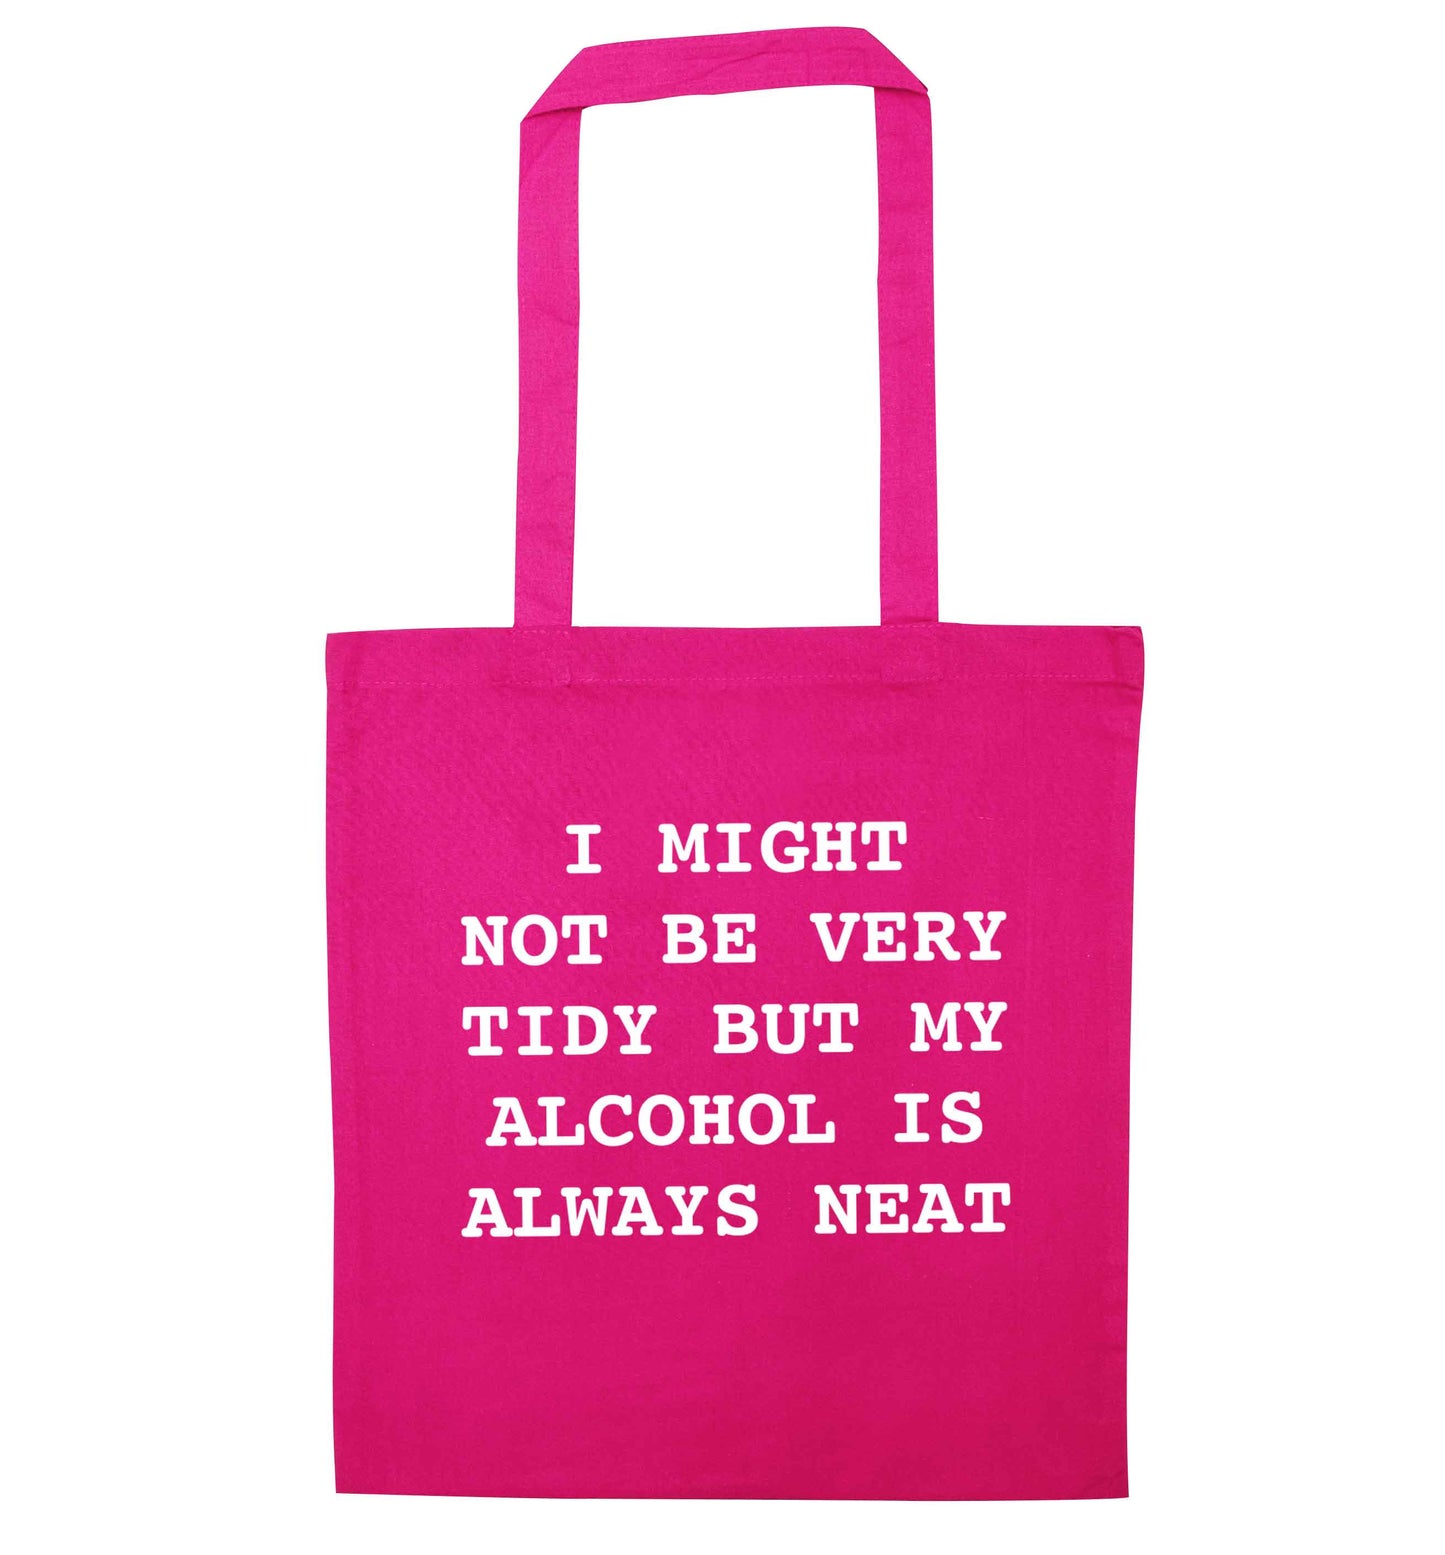 I might not be tidy but my alcohol is always neat pink tote bag